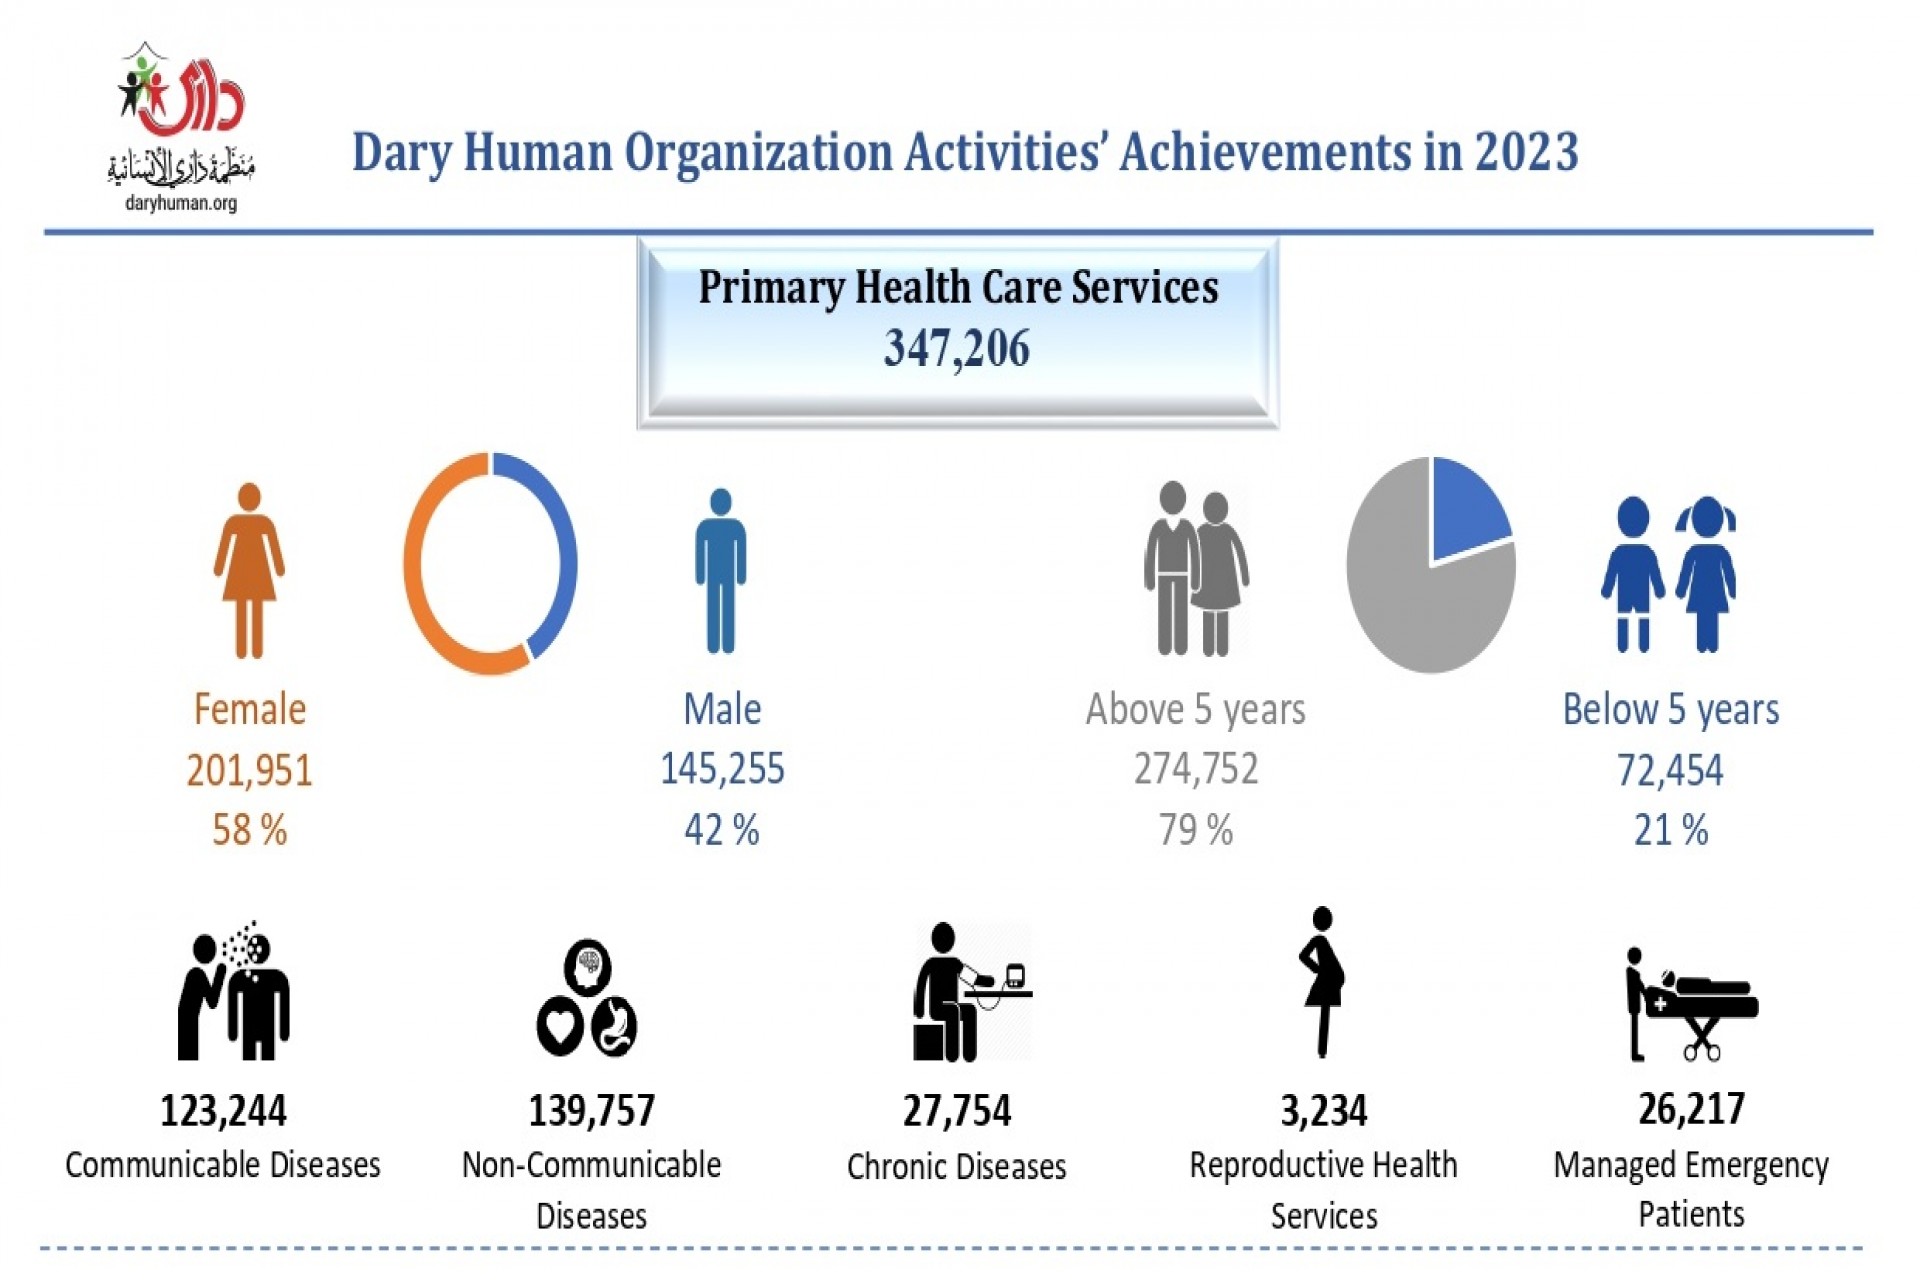 <span style='font-size:16px;'>DARY HUMAN ORGANIZATION'S ACTIVITIES IN 2023 - PRIMARY HEALTHCARE SERVICES</span>